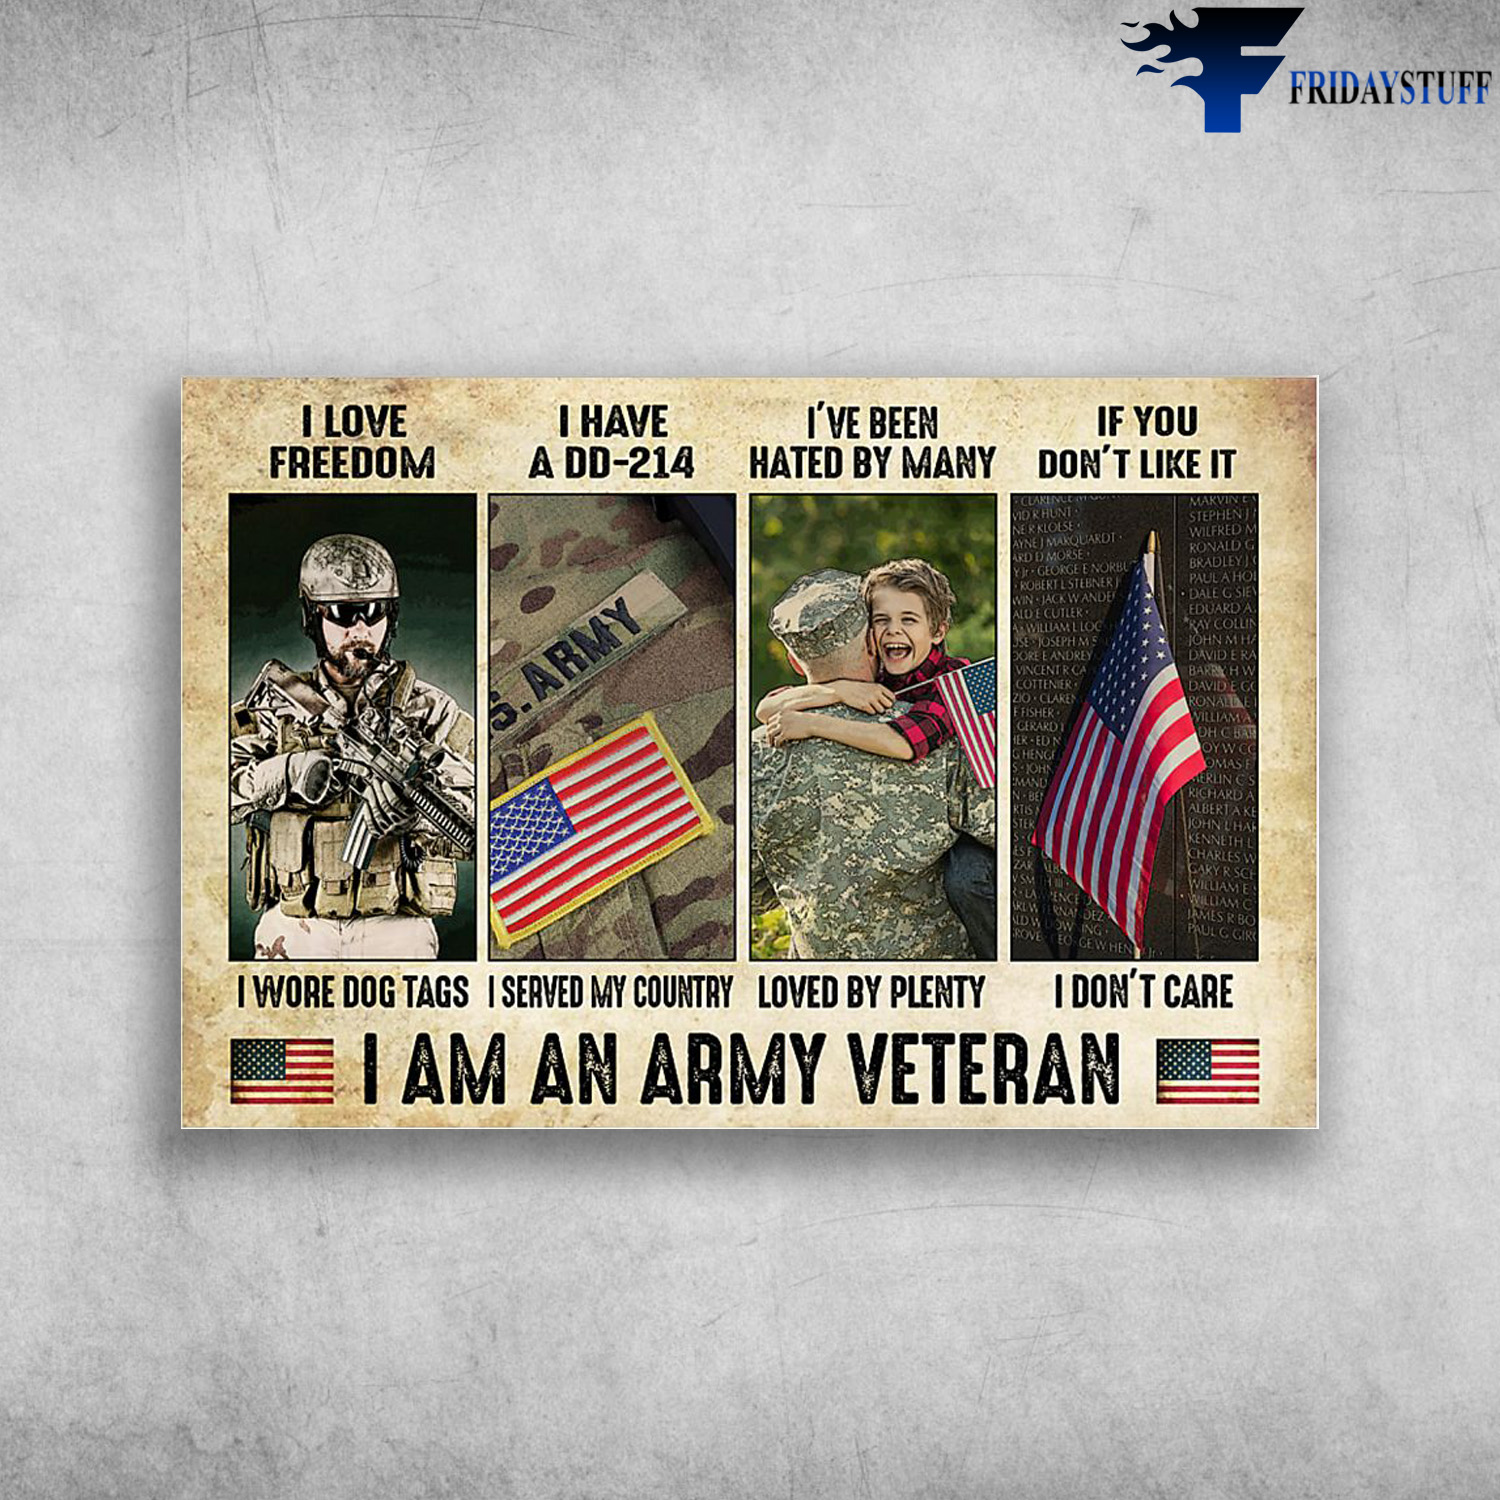 I Am An Army Veteran - I Love Freedom, I Wore Dog Tags, I Have A DD-214, I Served My Country